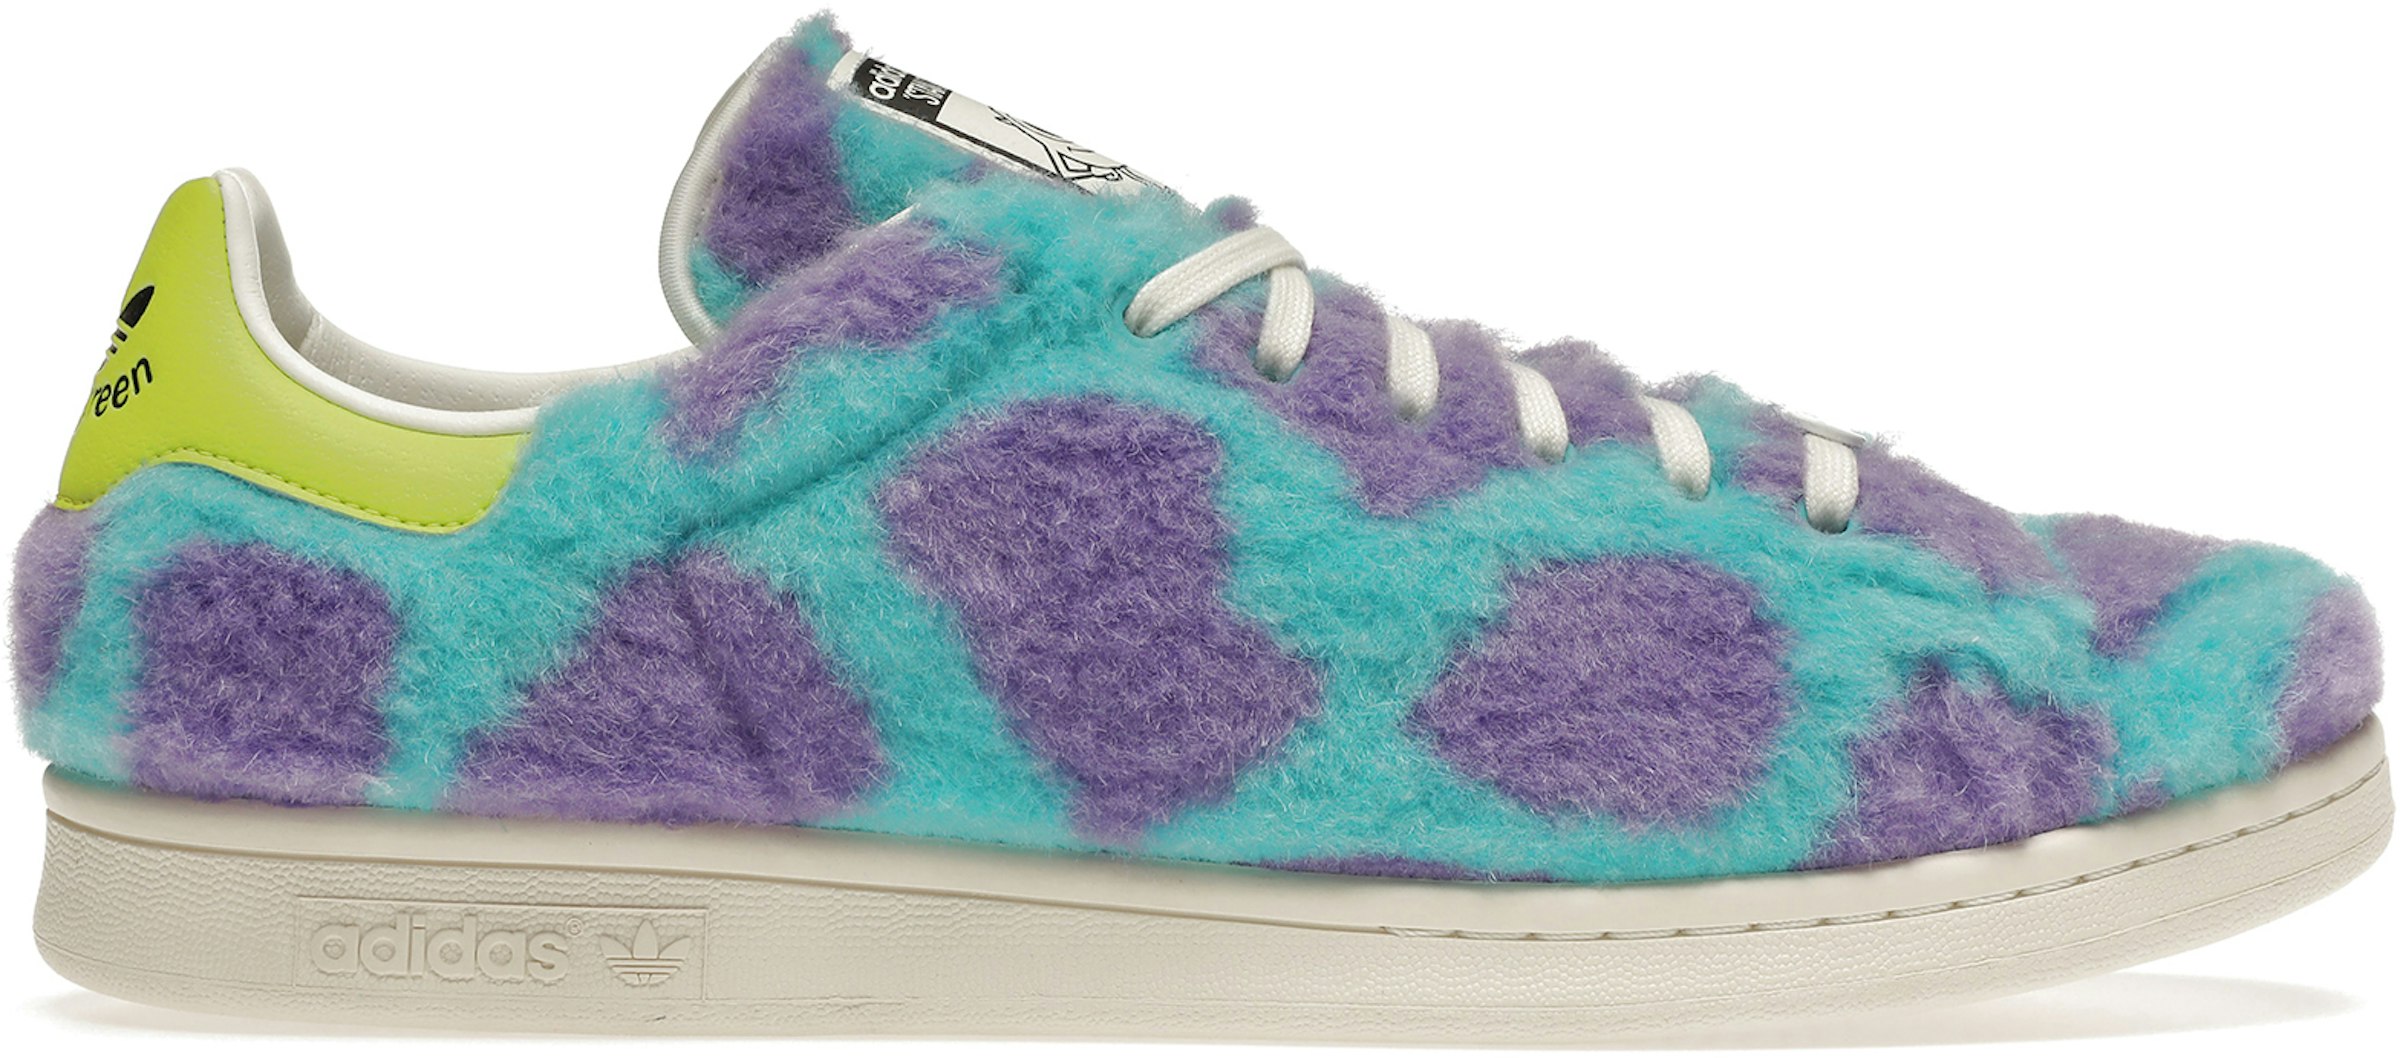 adidas Stan Smith Mike & Sulley Inc. Men's - GZ5990 - US